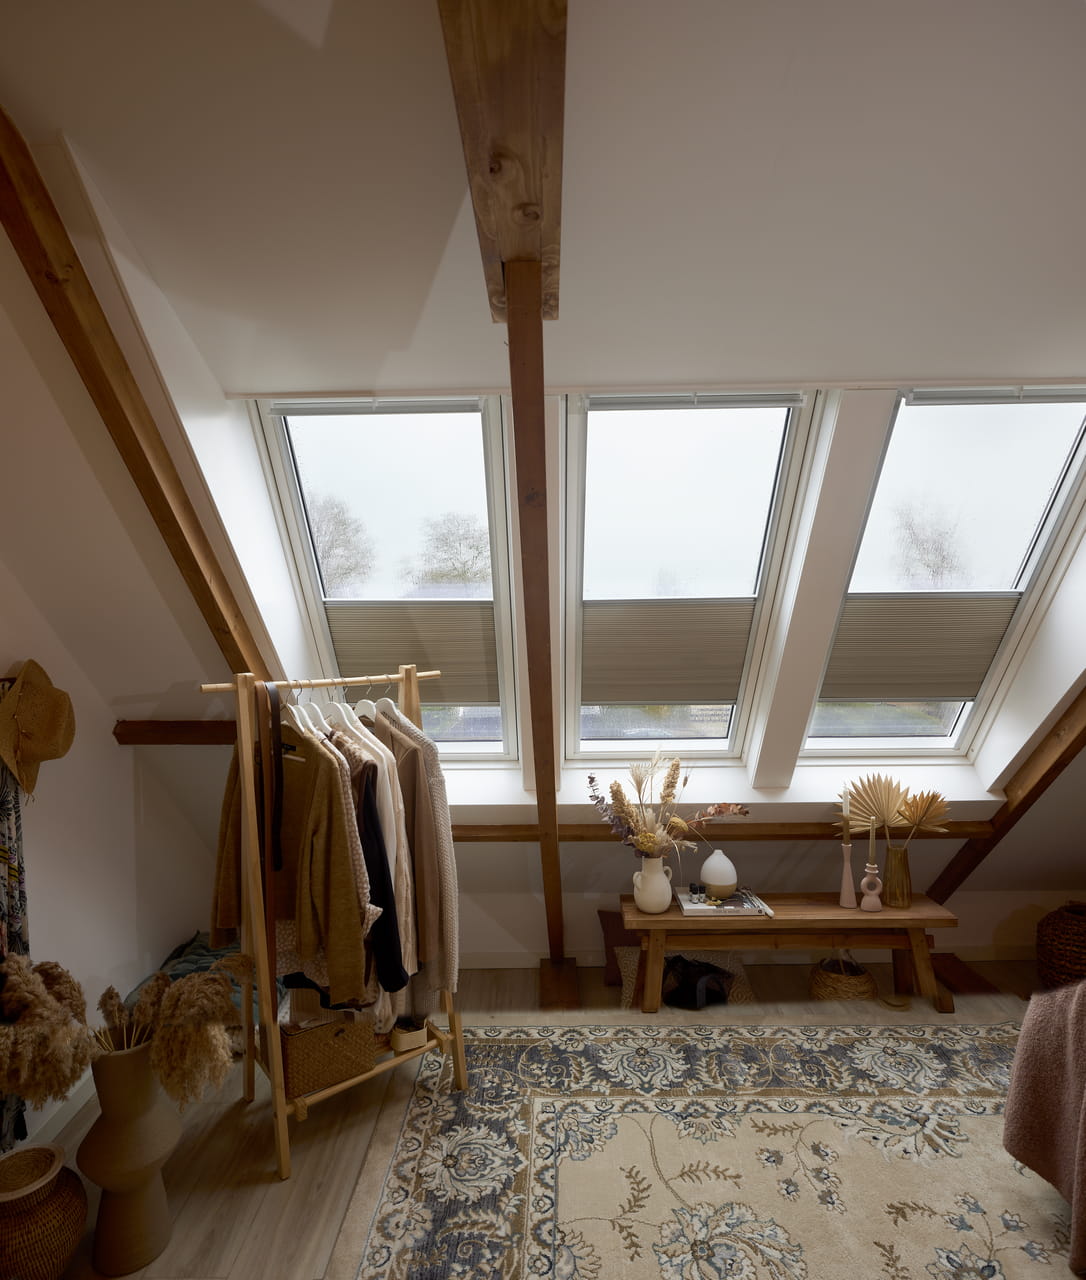 A living room area with 2 roof windows